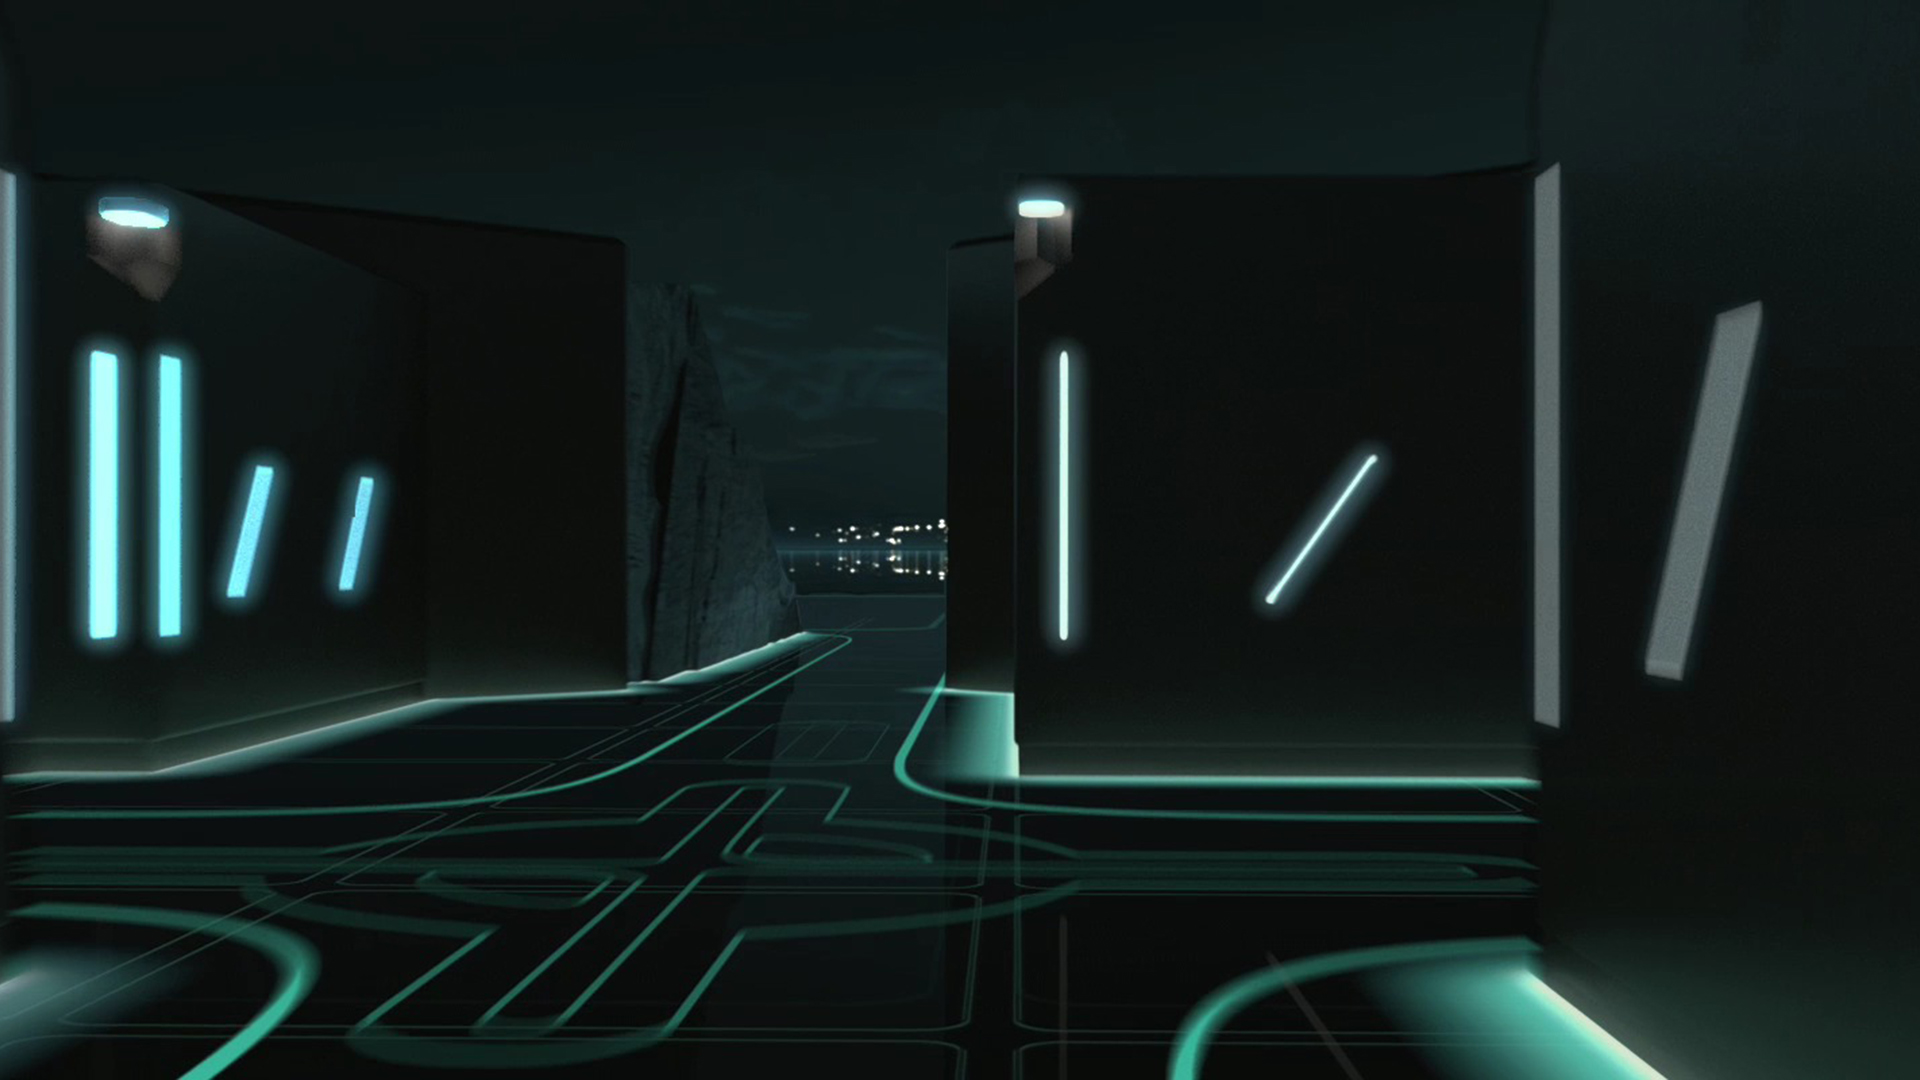 Tron Legacy Desktop Wallpapers for HD Widescreen and Mobile 1920x1080